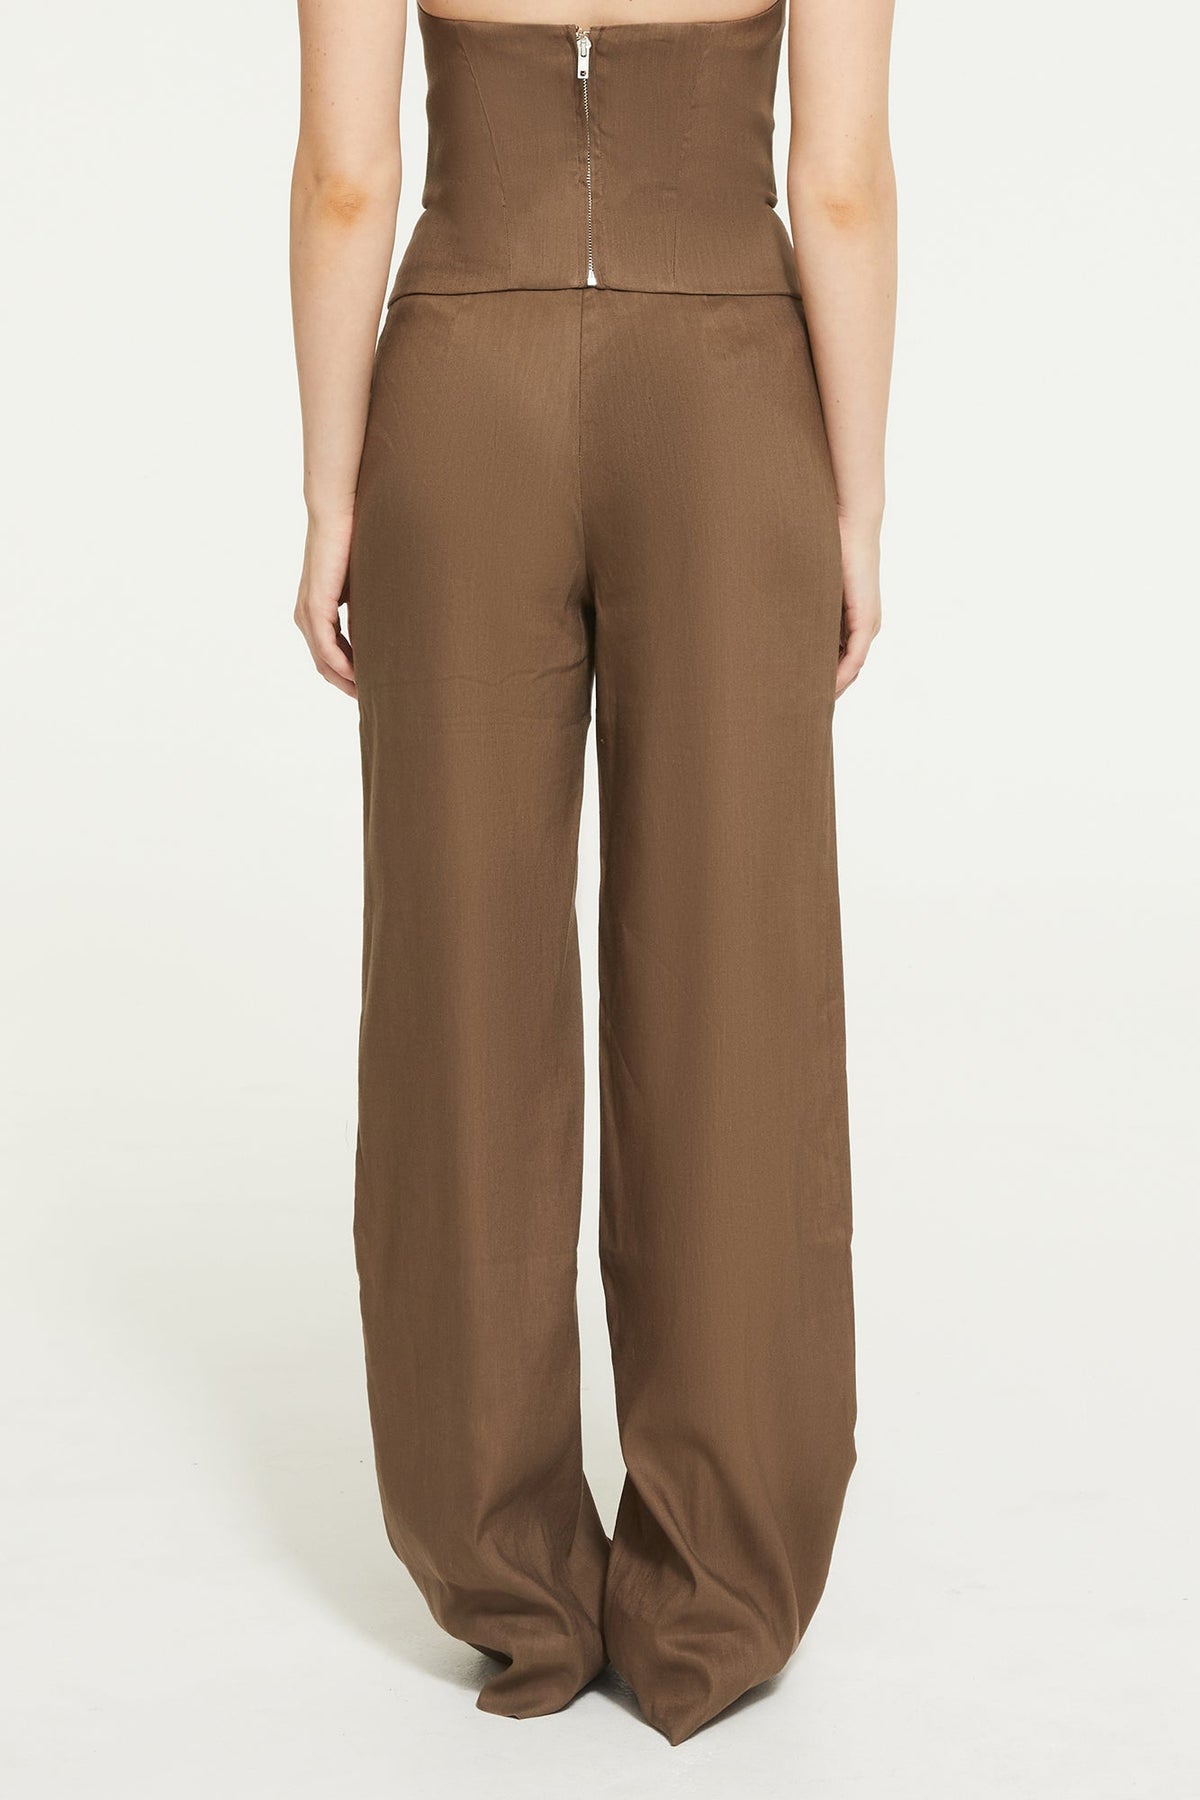 The Mamacita Pant By GINIA In Cocoa